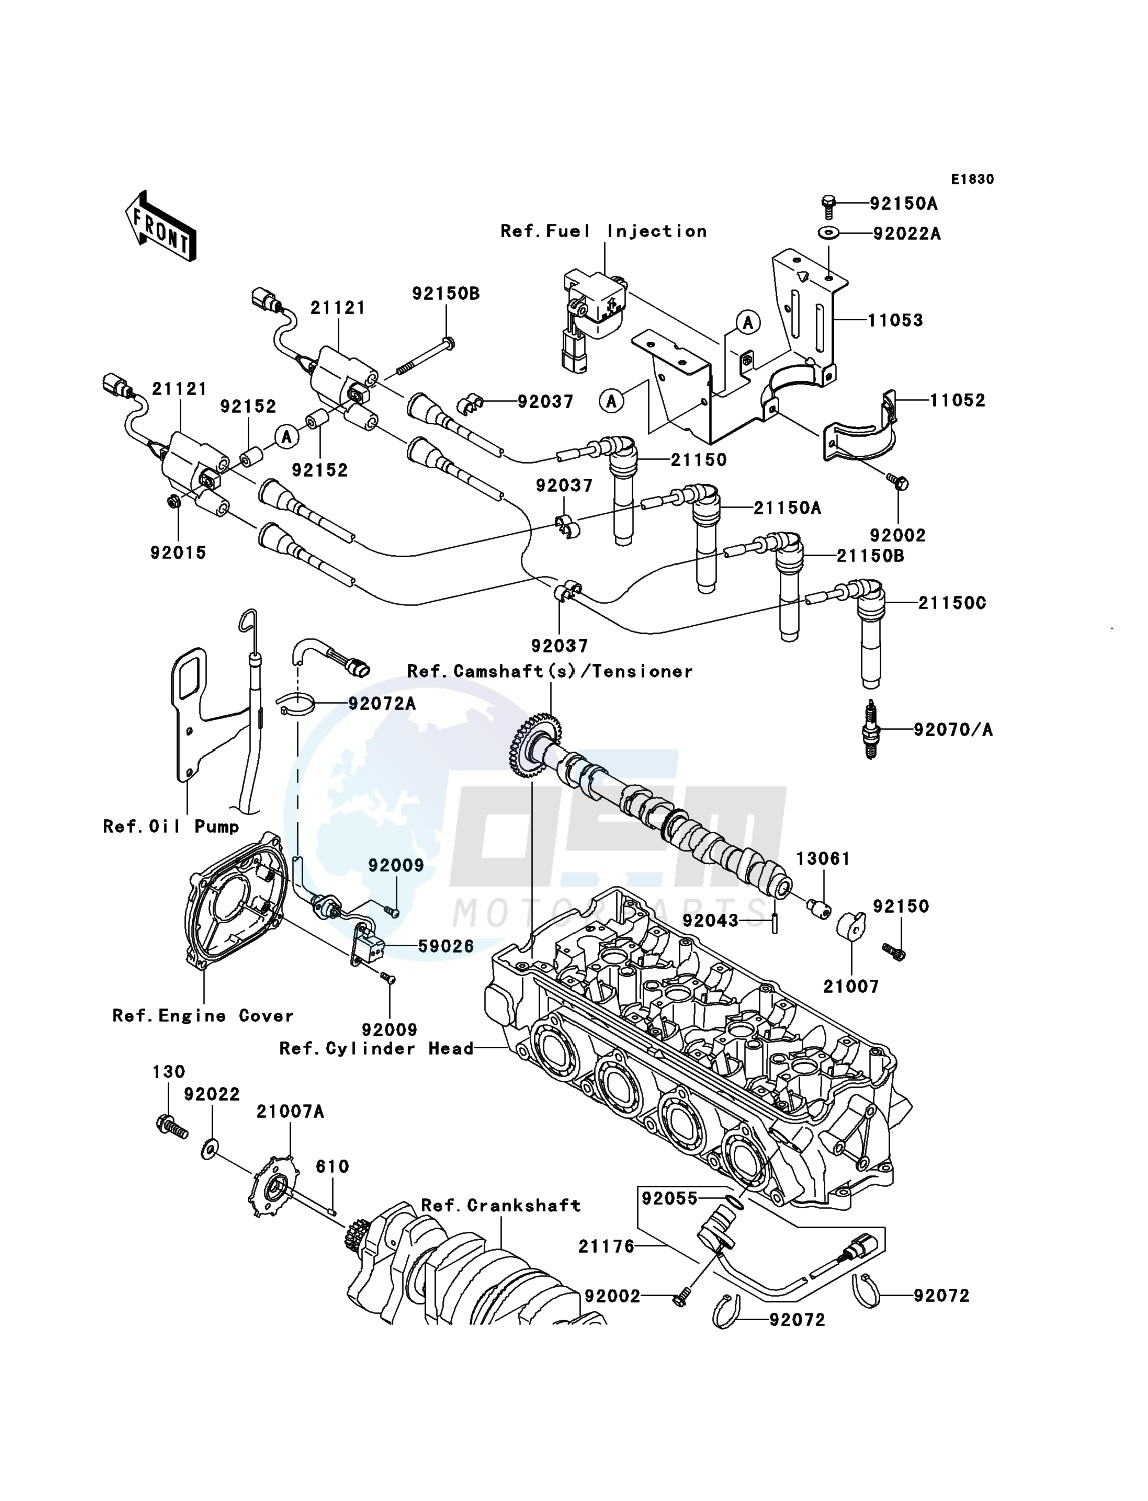 Ignition System image